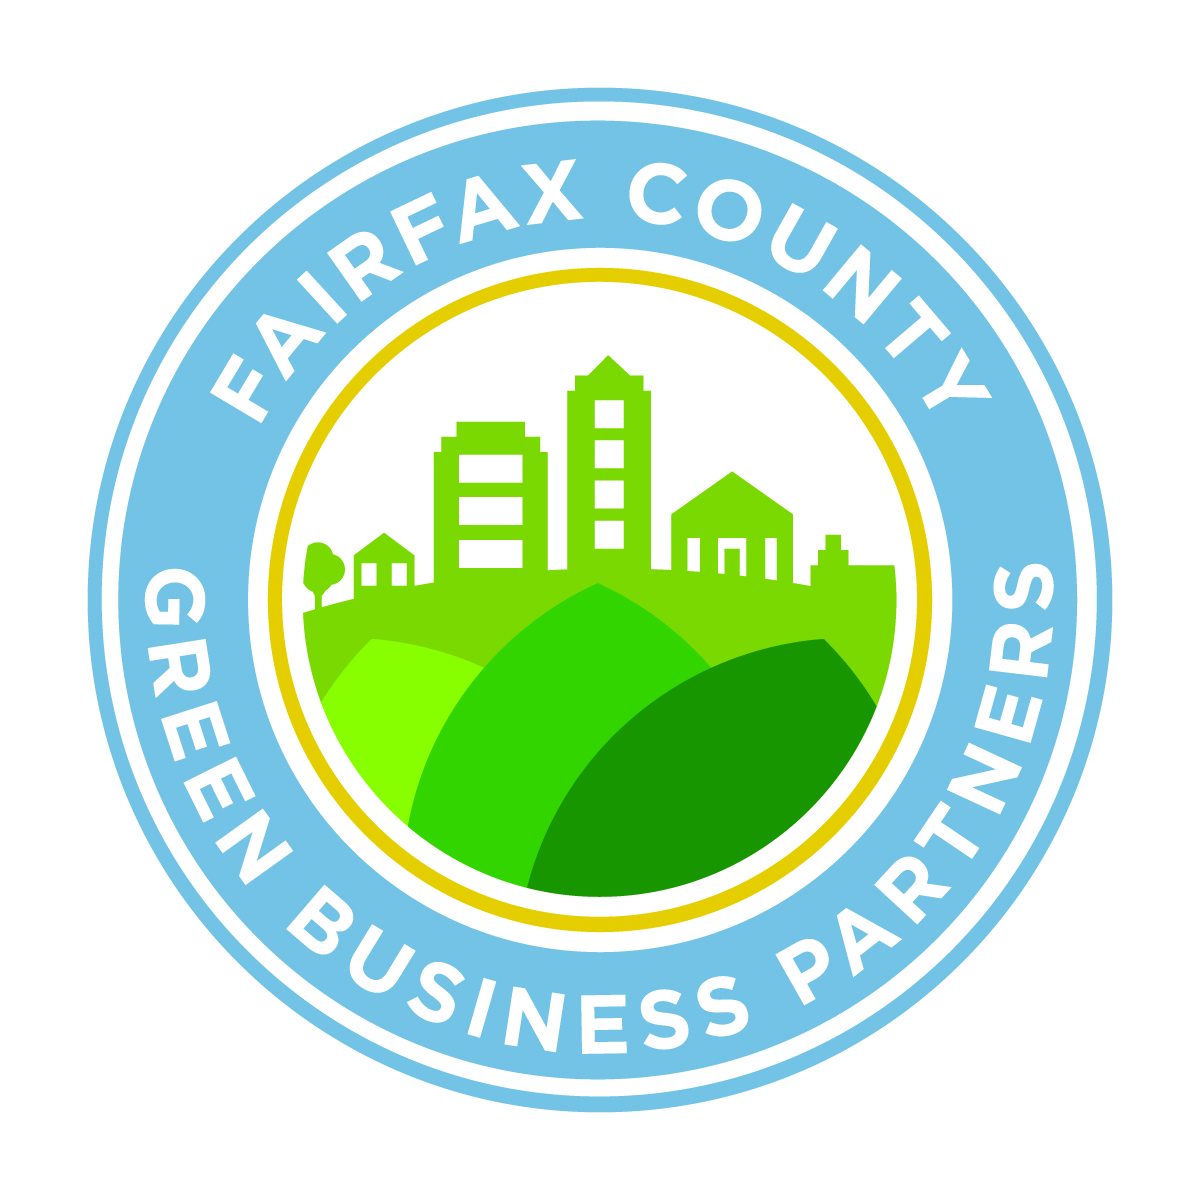 Green Business Parnters logo.